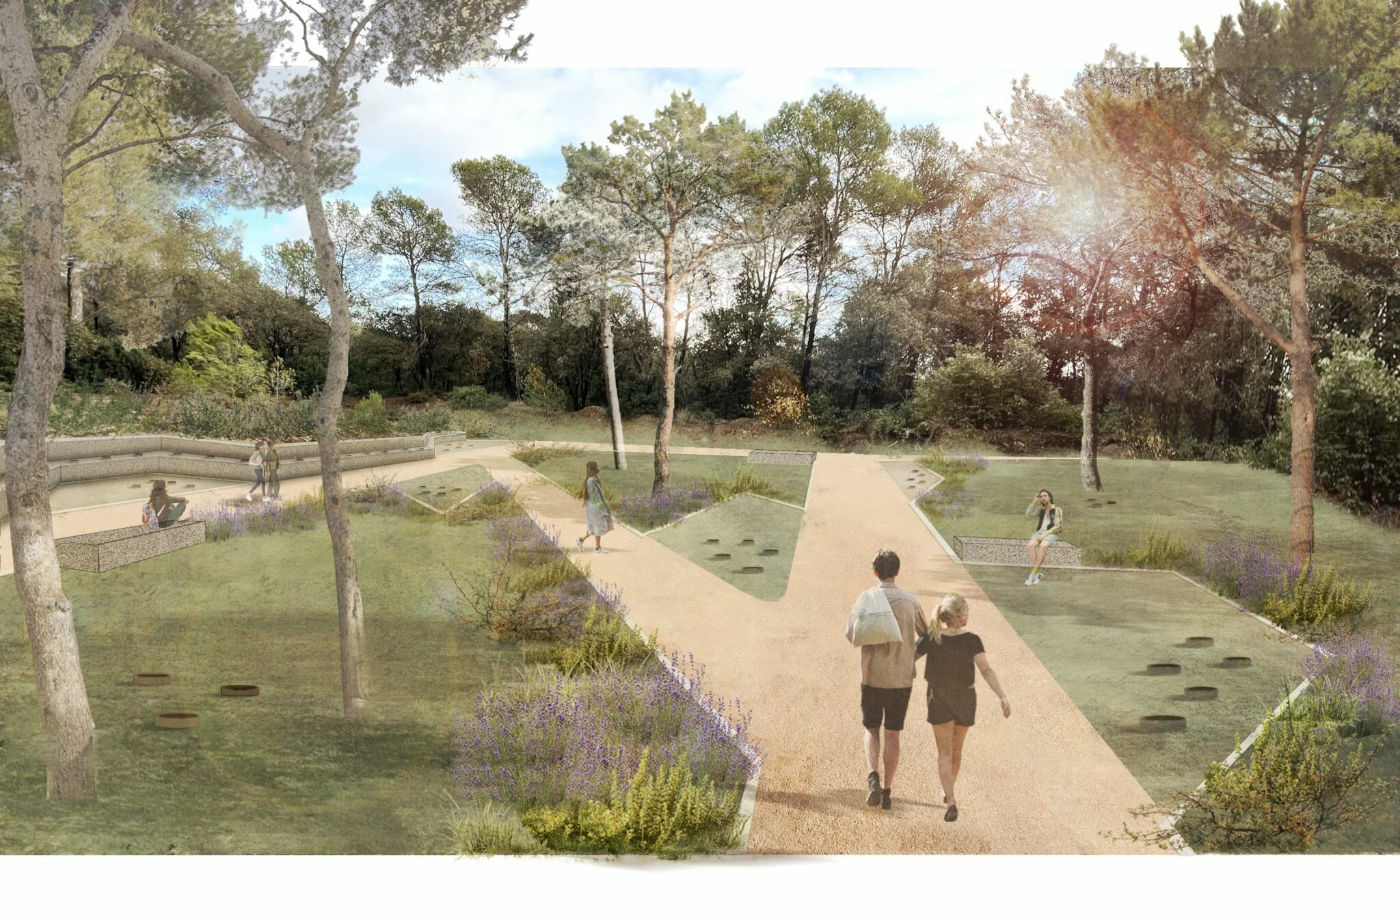 Barcelona will have a public cemetery for pets in 2024.